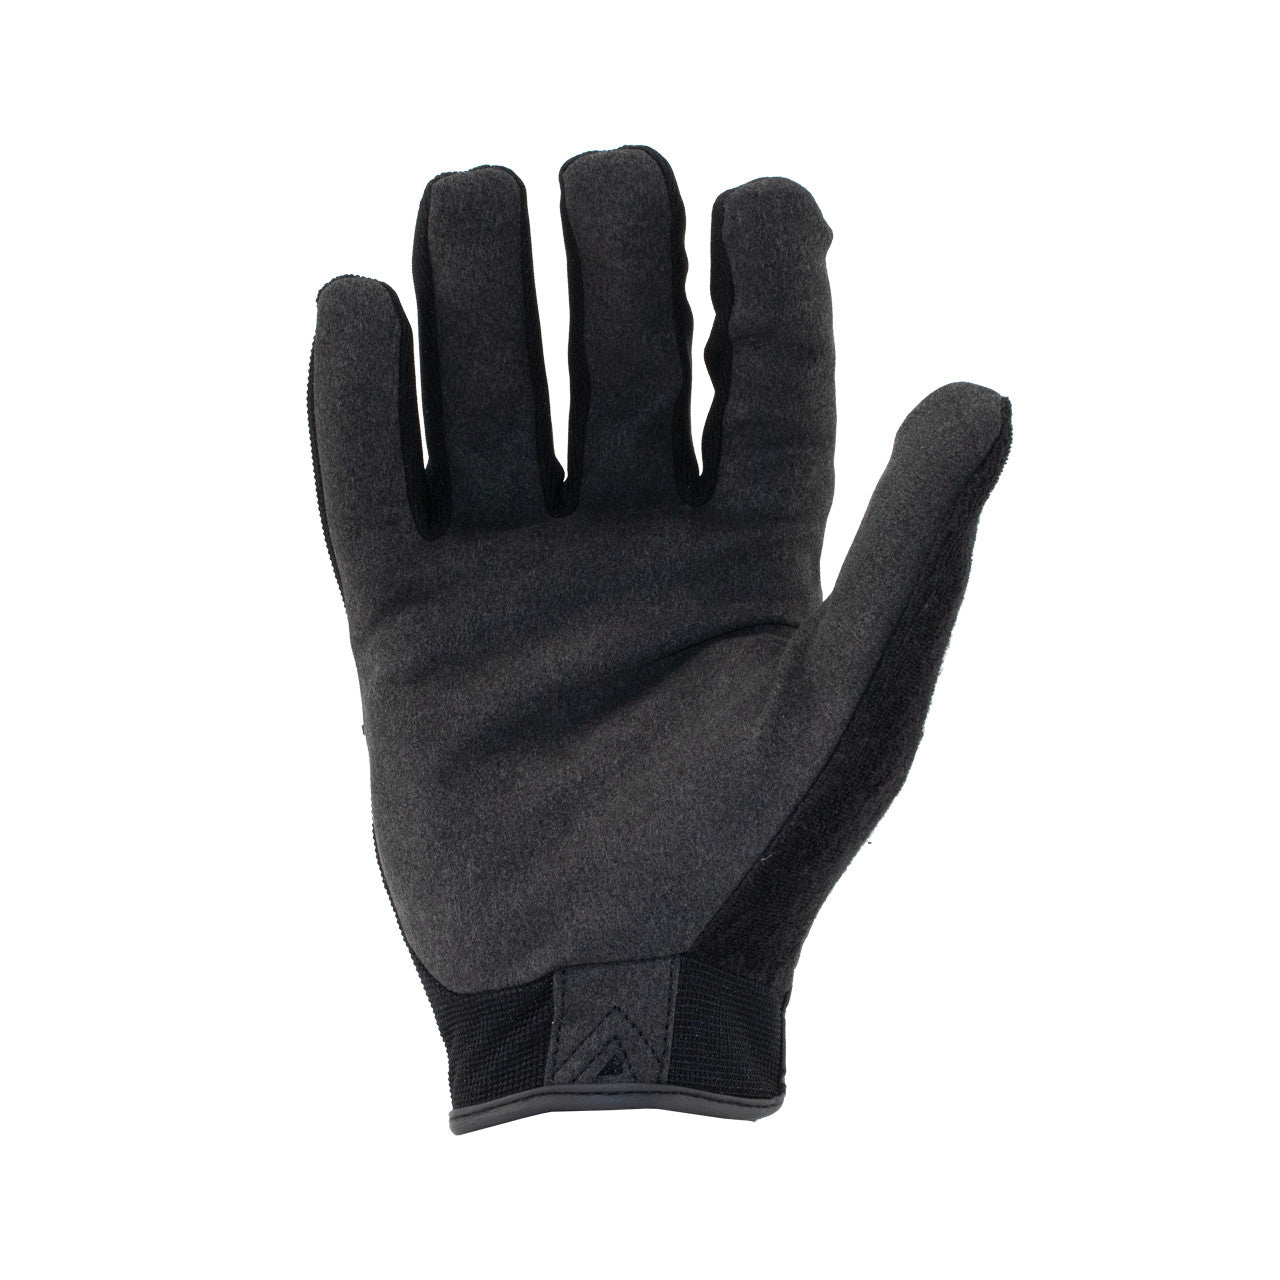 Ironclad Command™ Pro Glove Black-eSafety Supplies, Inc